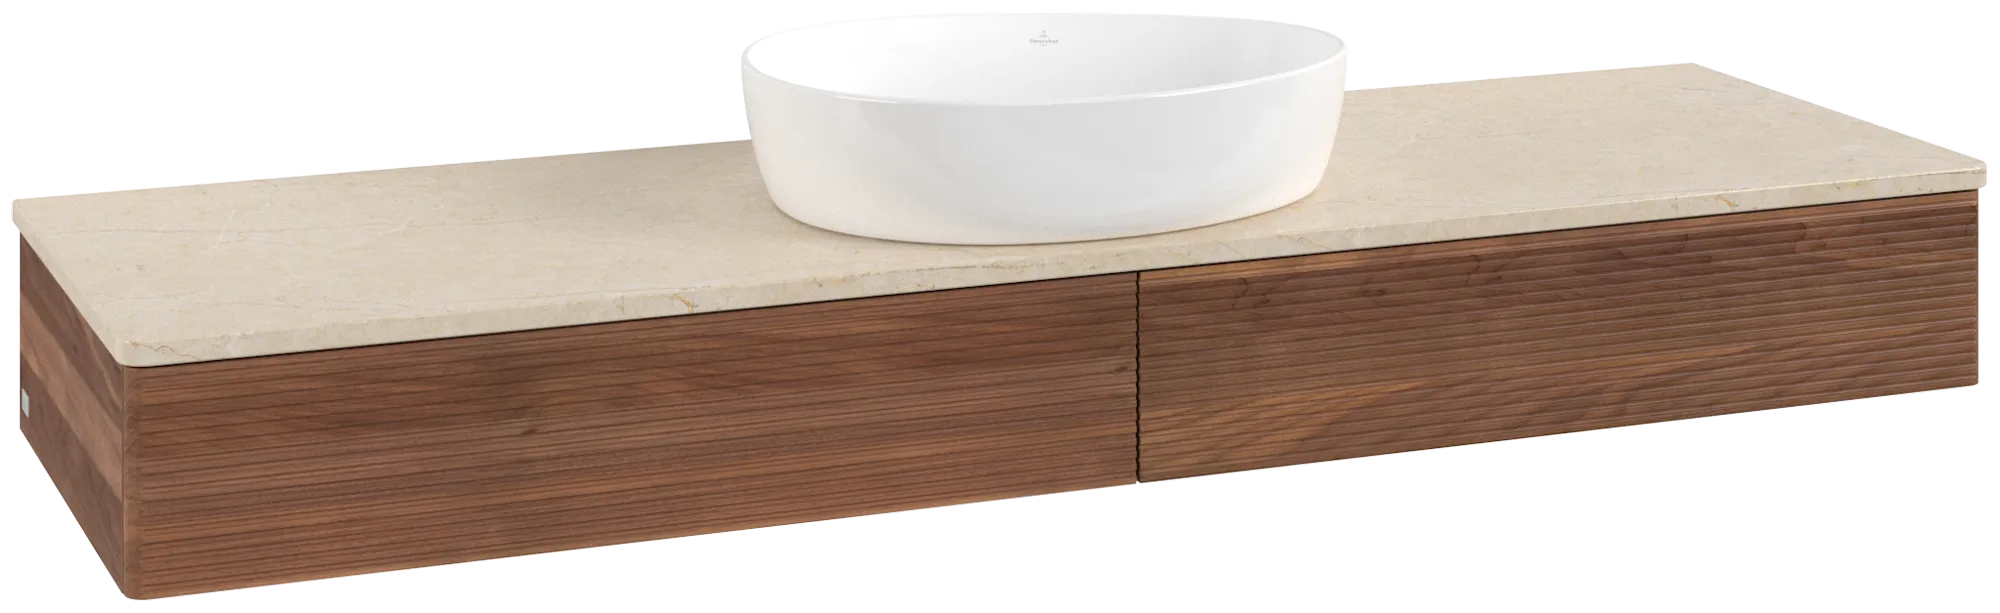 VILLEROY BOCH Antao Vanity unit, 2 pull-out compartments, 1600 x 190 x 500 mm, Front with grain texture, Warm Walnut / Botticino #K14113HM resmi